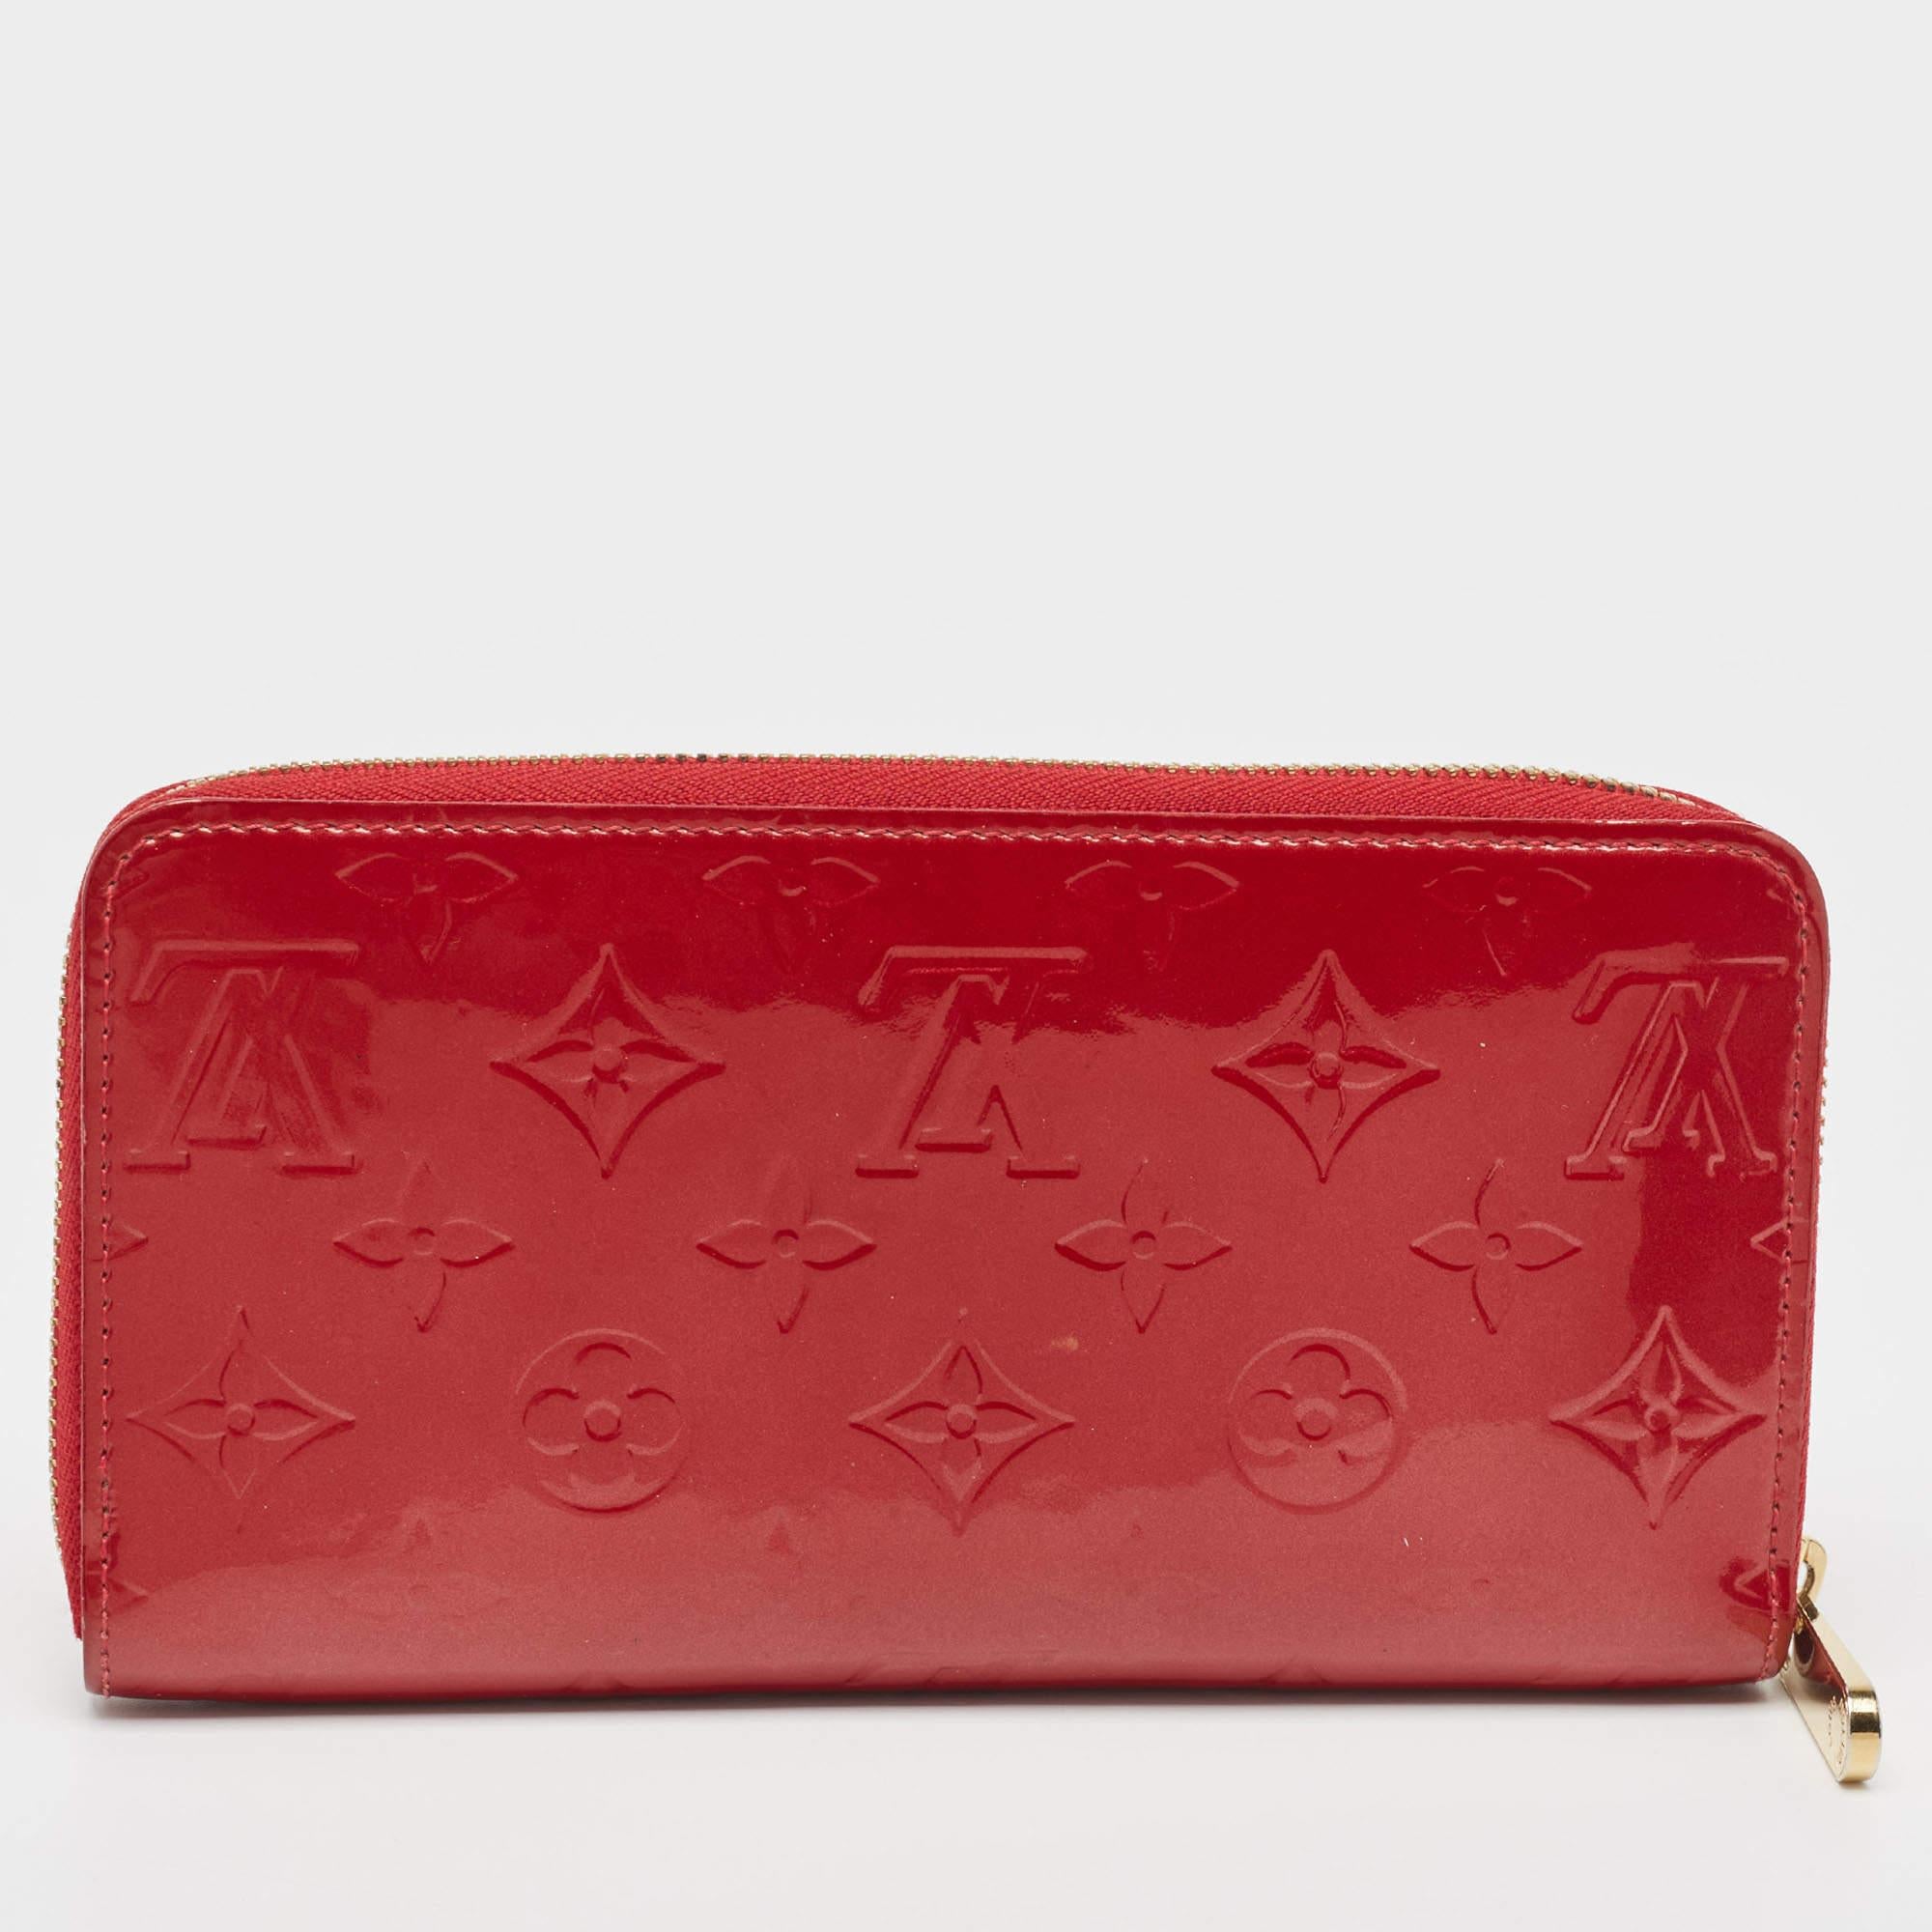 This Louis Vuitton Zippy wallet is conveniently designed for everyday use. Crafted from Pomme D’amour Monogram Vernis, the wallet has a wide zip closure that opens to reveal multiple slots, leather-lined compartments, and a zip pocket for you to